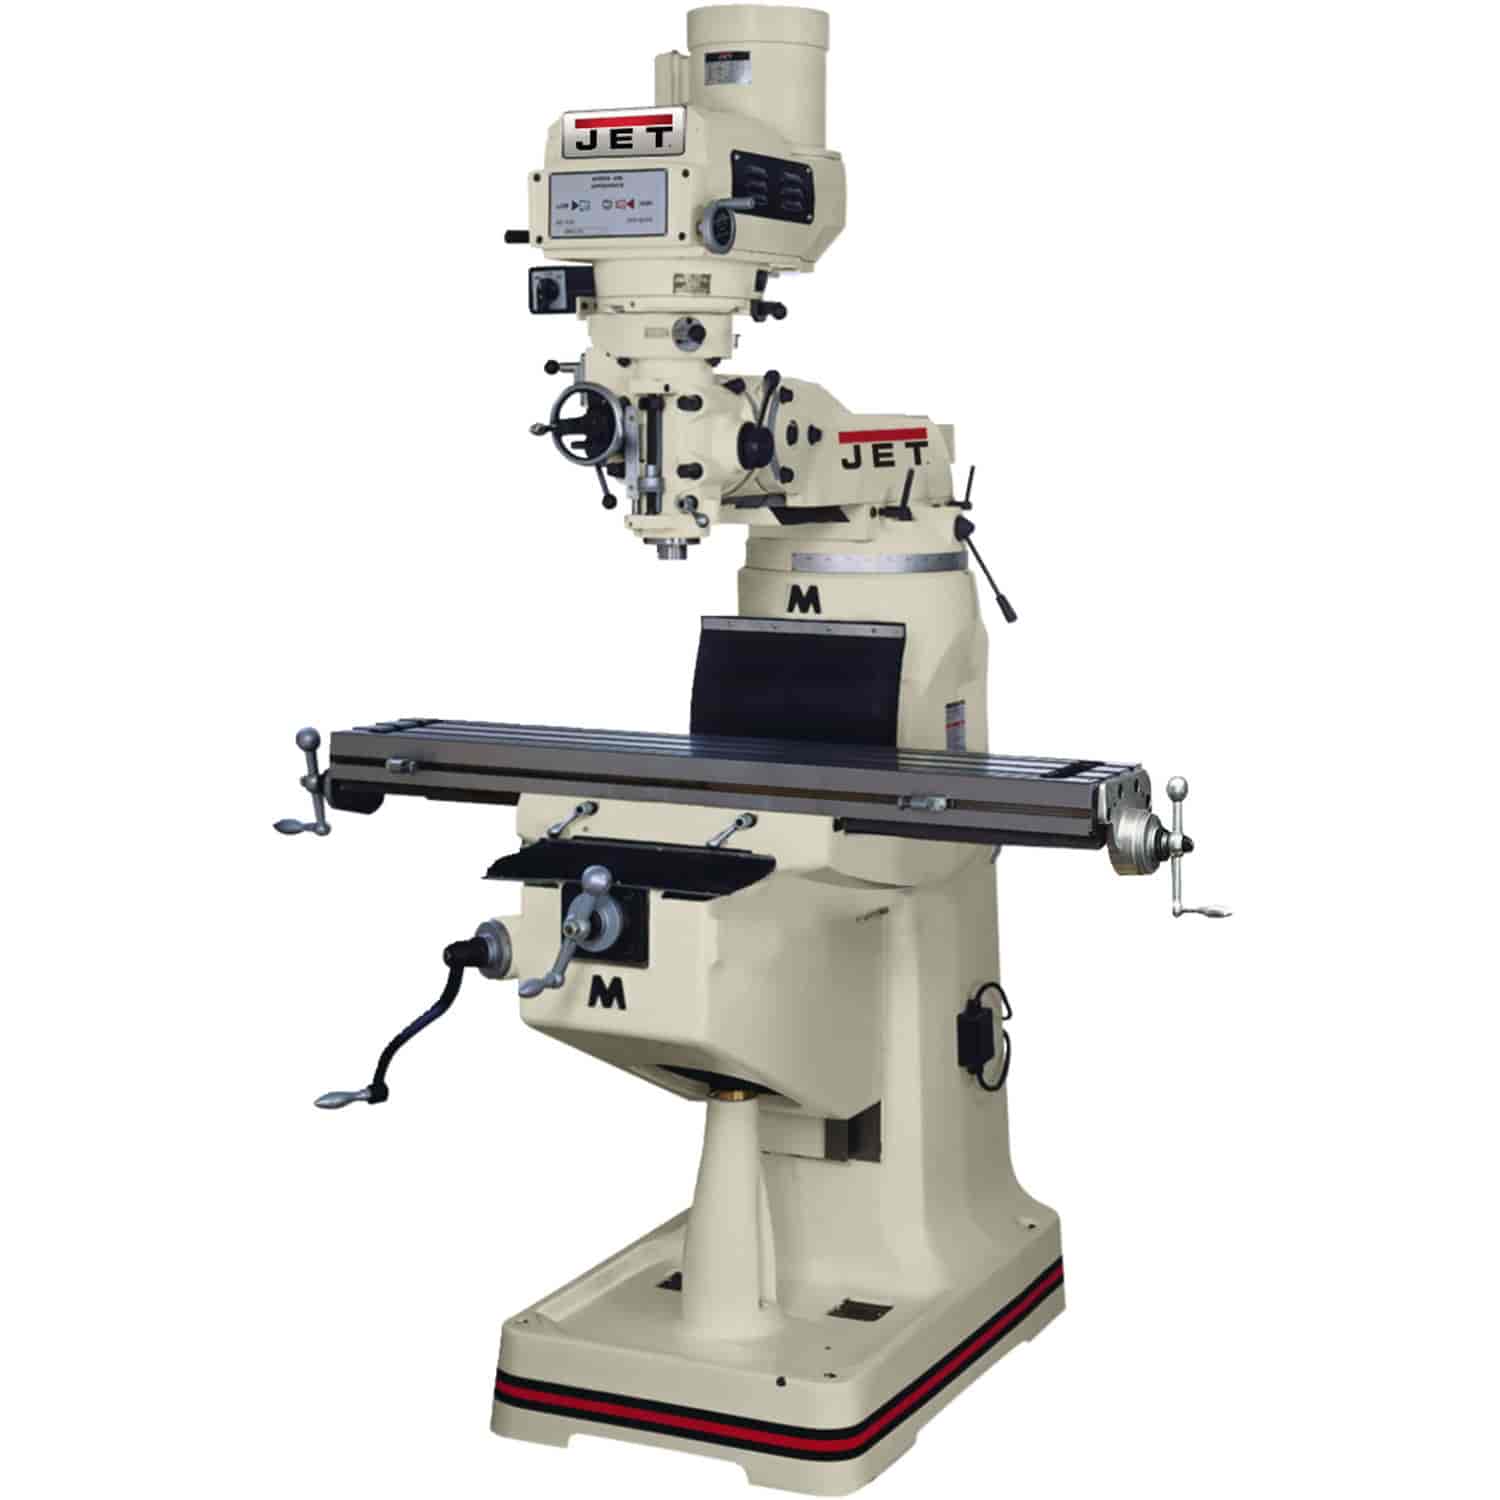 JTM-4VS Mill With 3-Axis ACU-RITE 300S DRO Knee With X Y and Z-Axis Powerfeeds and Power Draw Bar